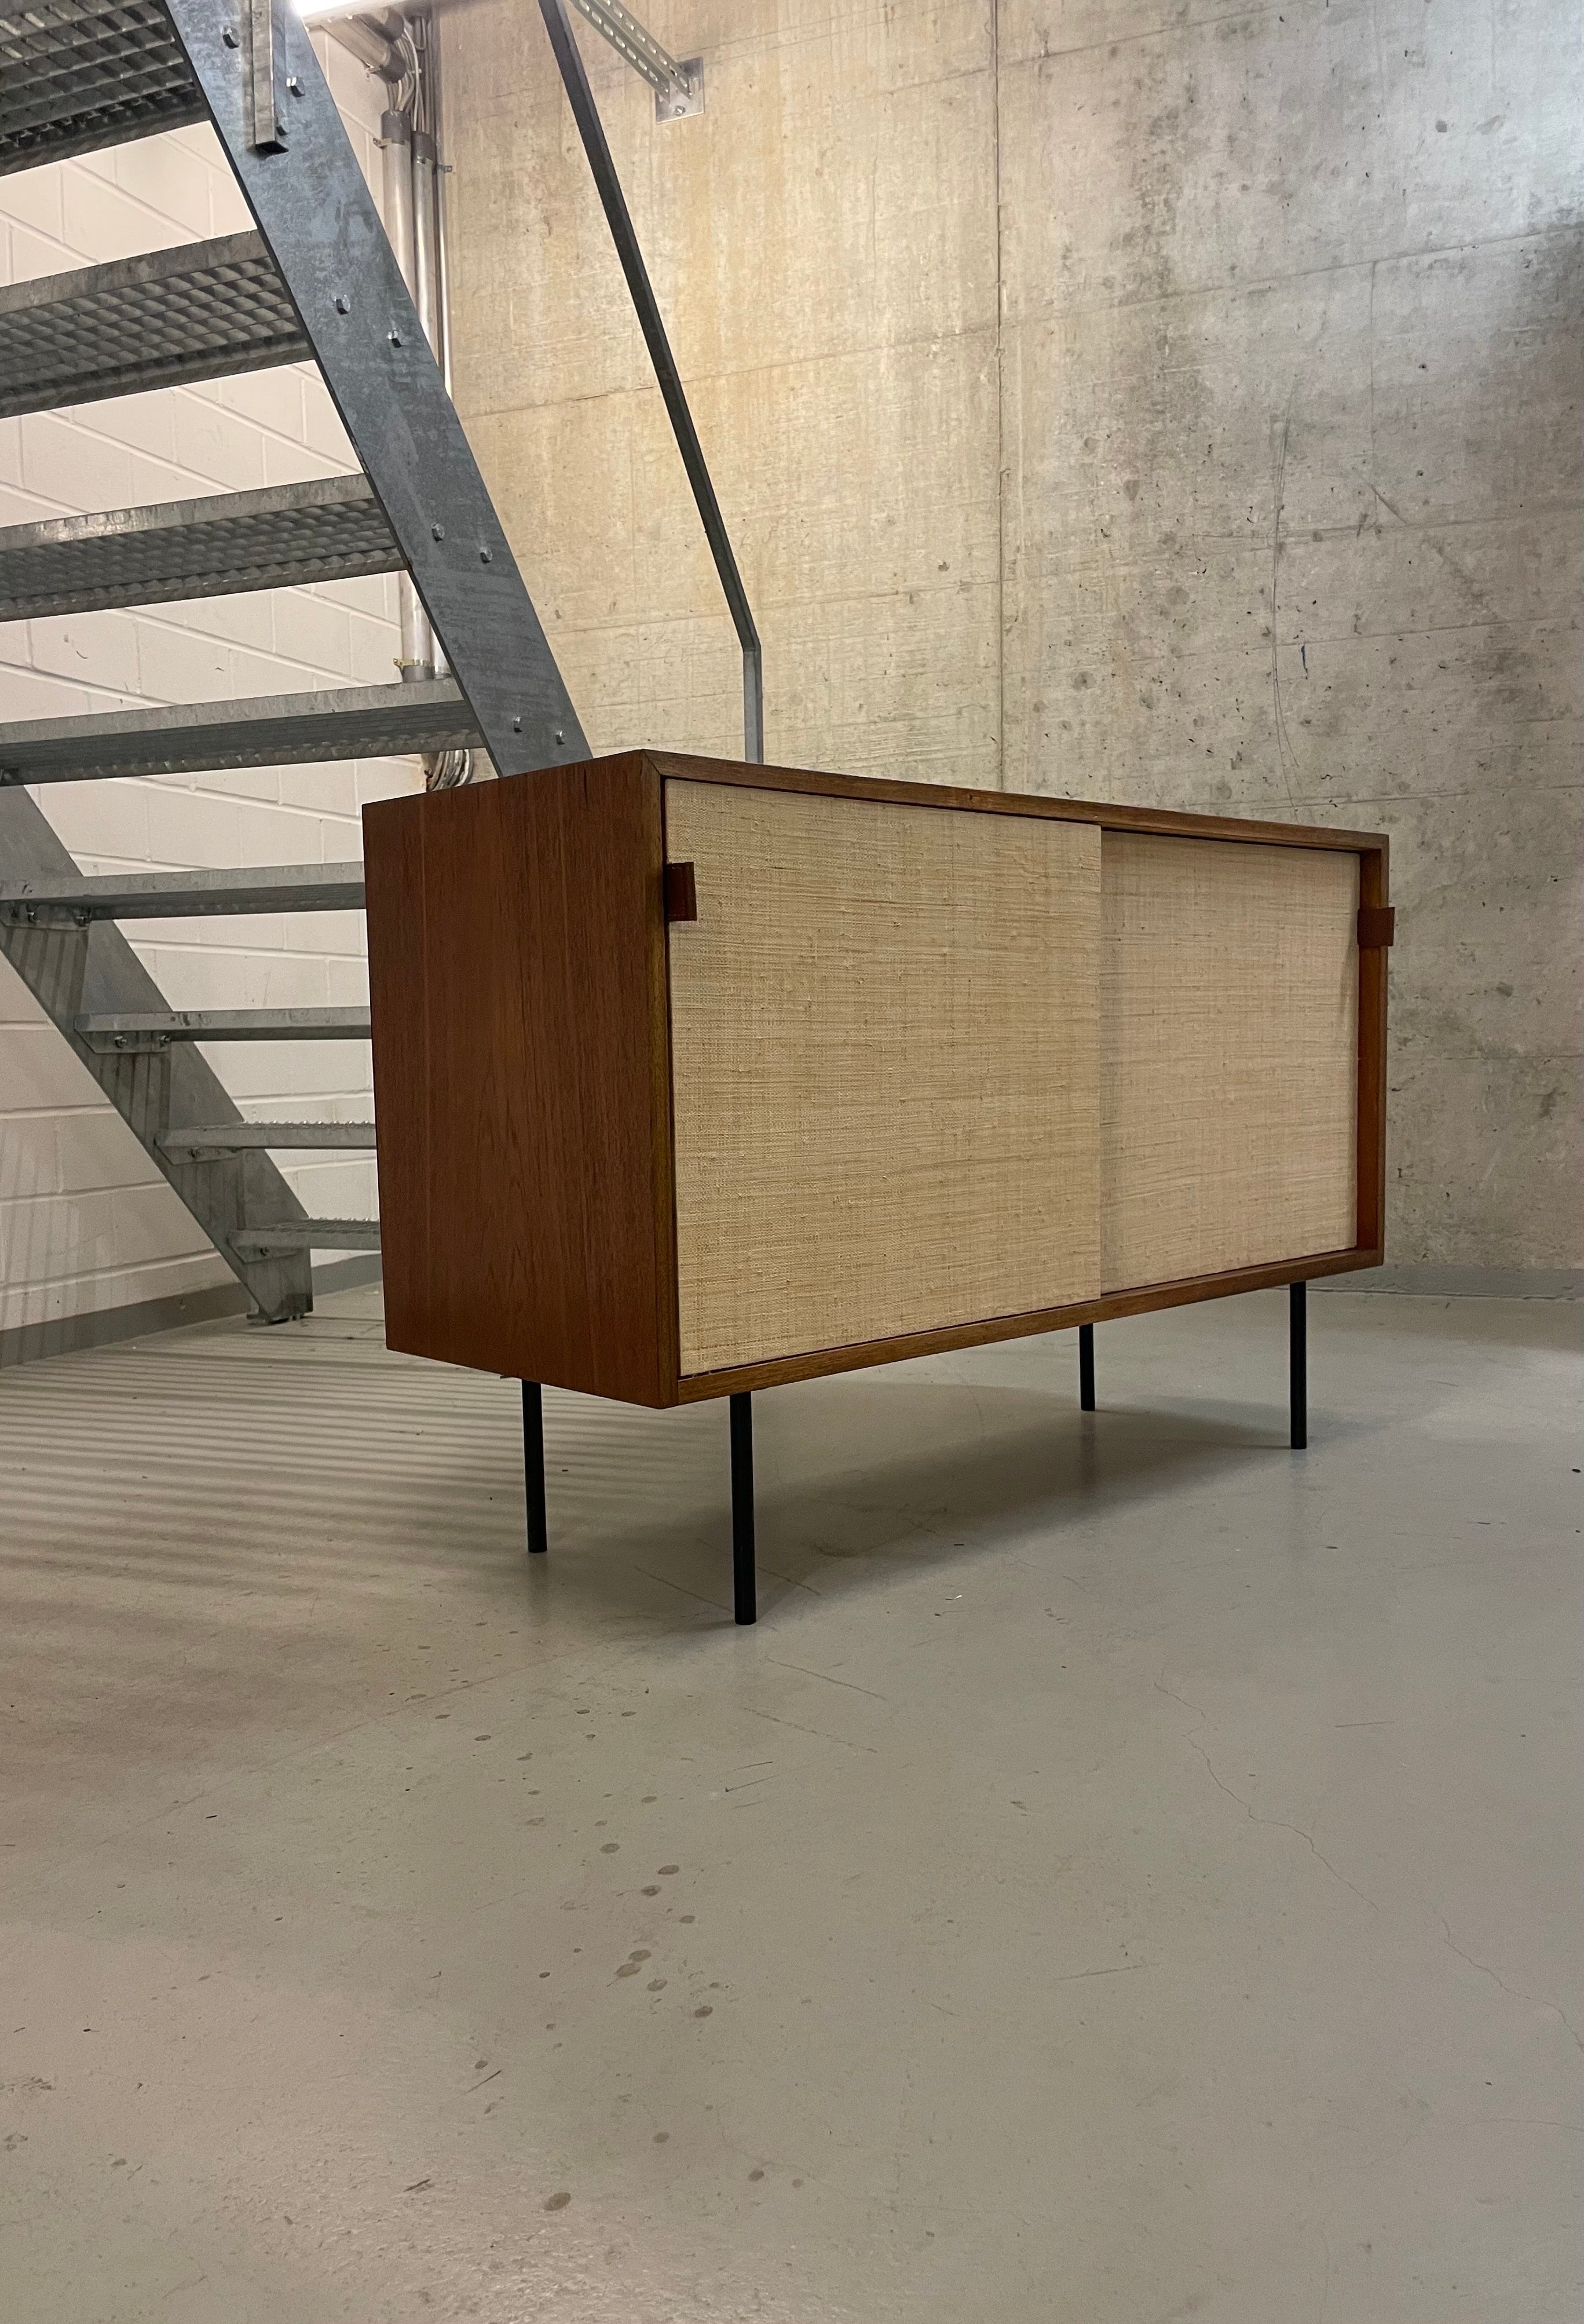 A classic modernist design sideboard by Florence Knoll, Model 116 for Knoll International - this version was produced in 1968 by Knoll International in Stuttgart. 

It features the typical sliding doors with Seagrass, wich was a popular detail